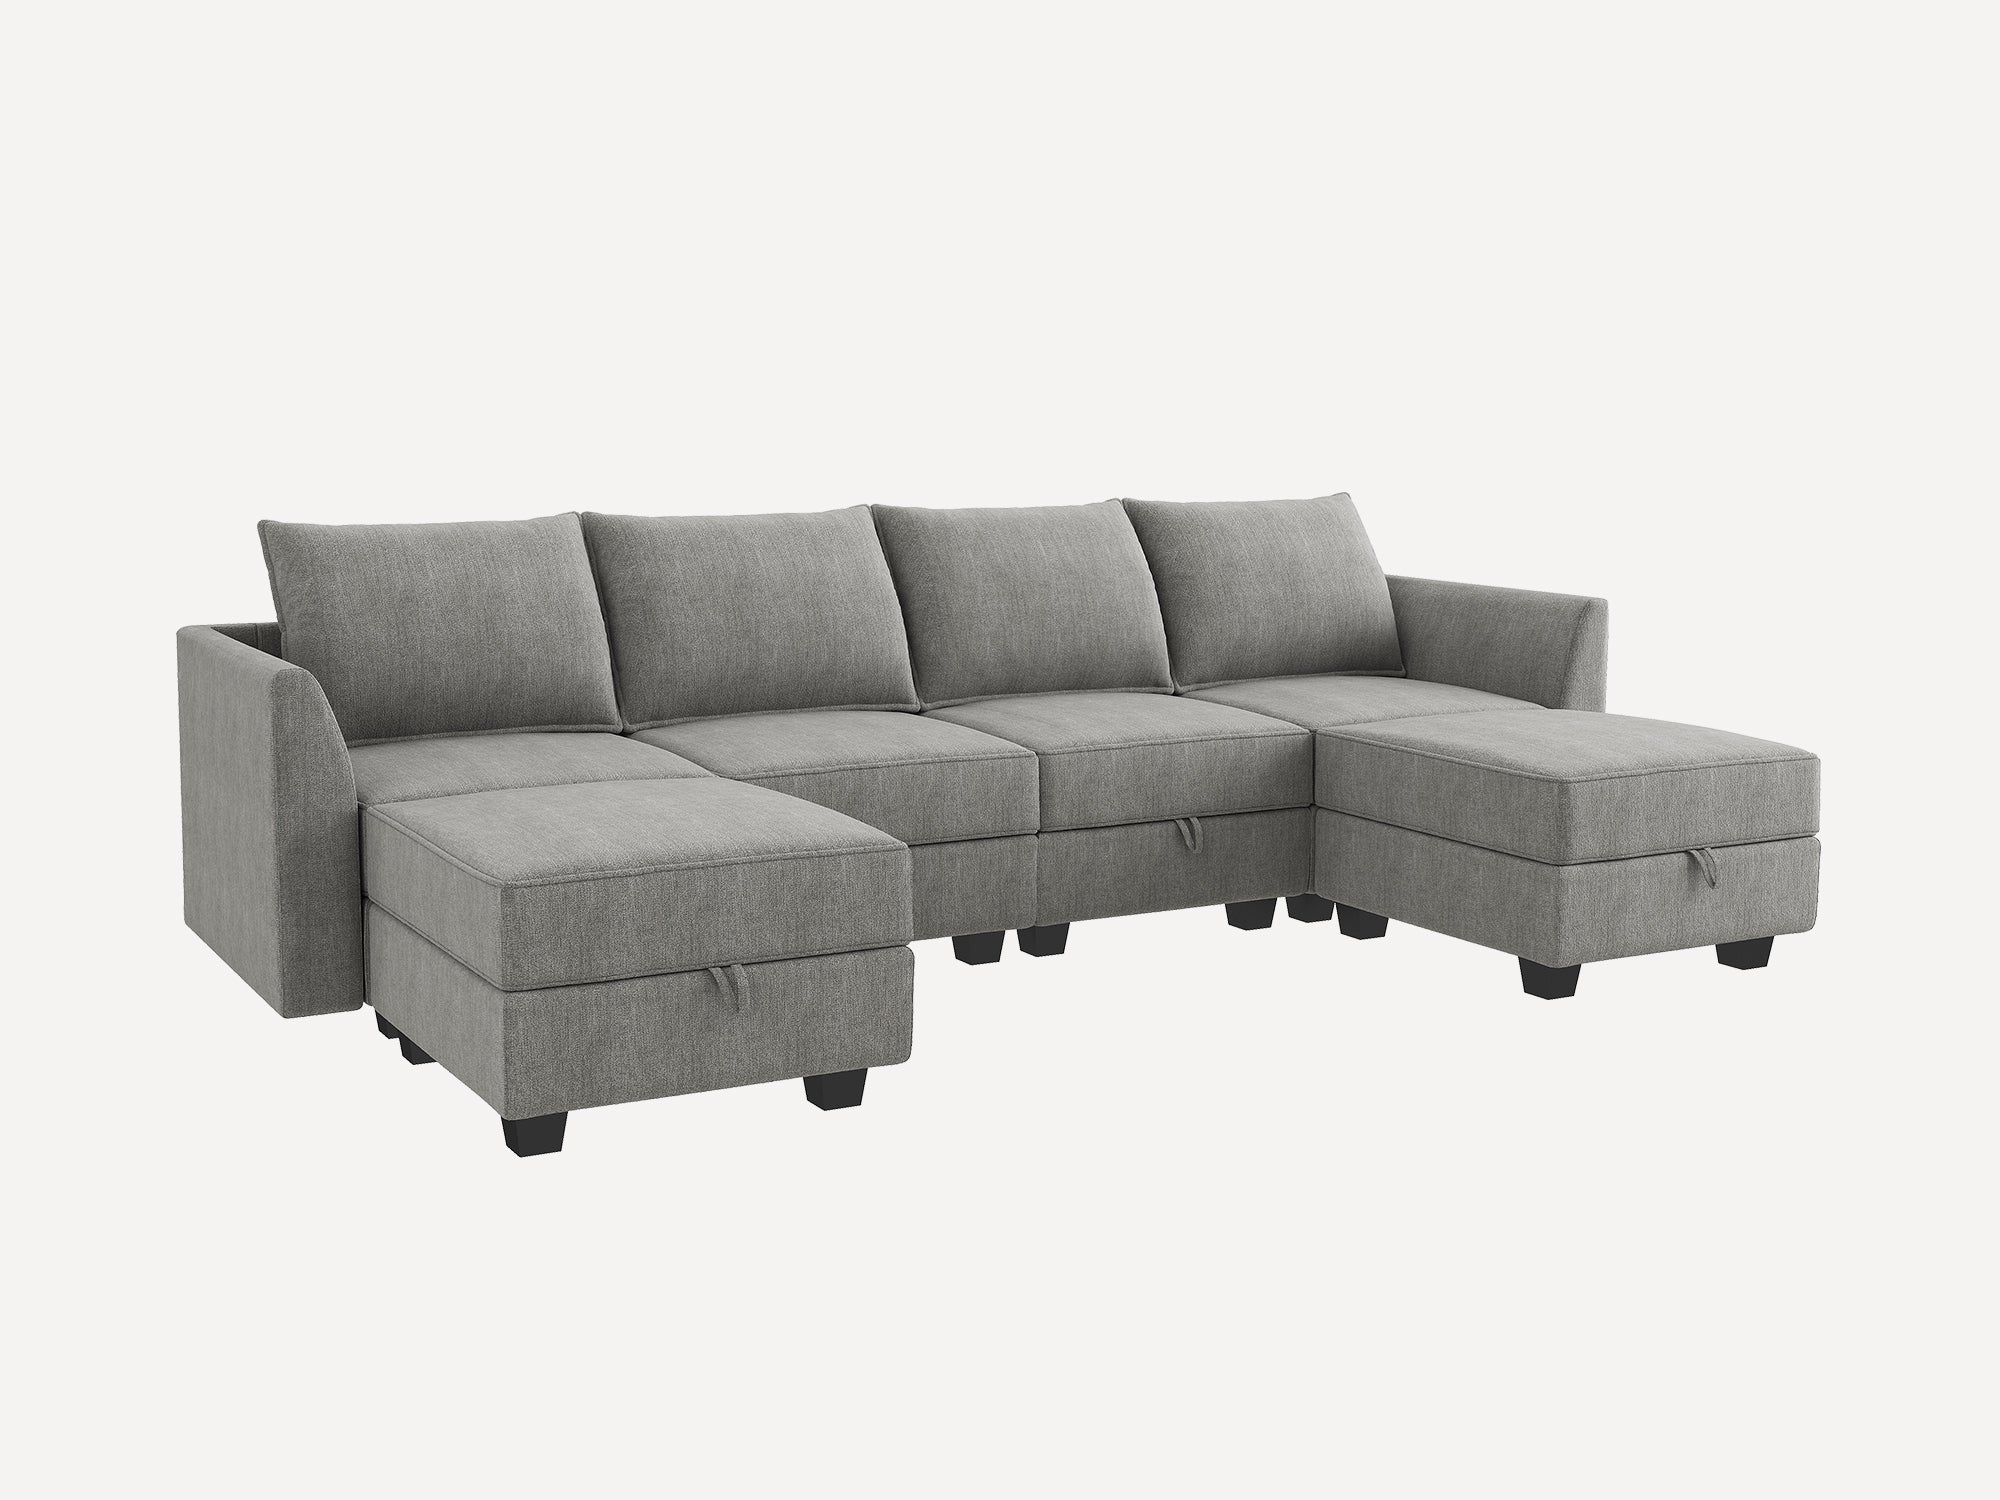 HONBAY Reversible Modular Sectional Sofa Couch U-Shaped Storage Seat for Living Room